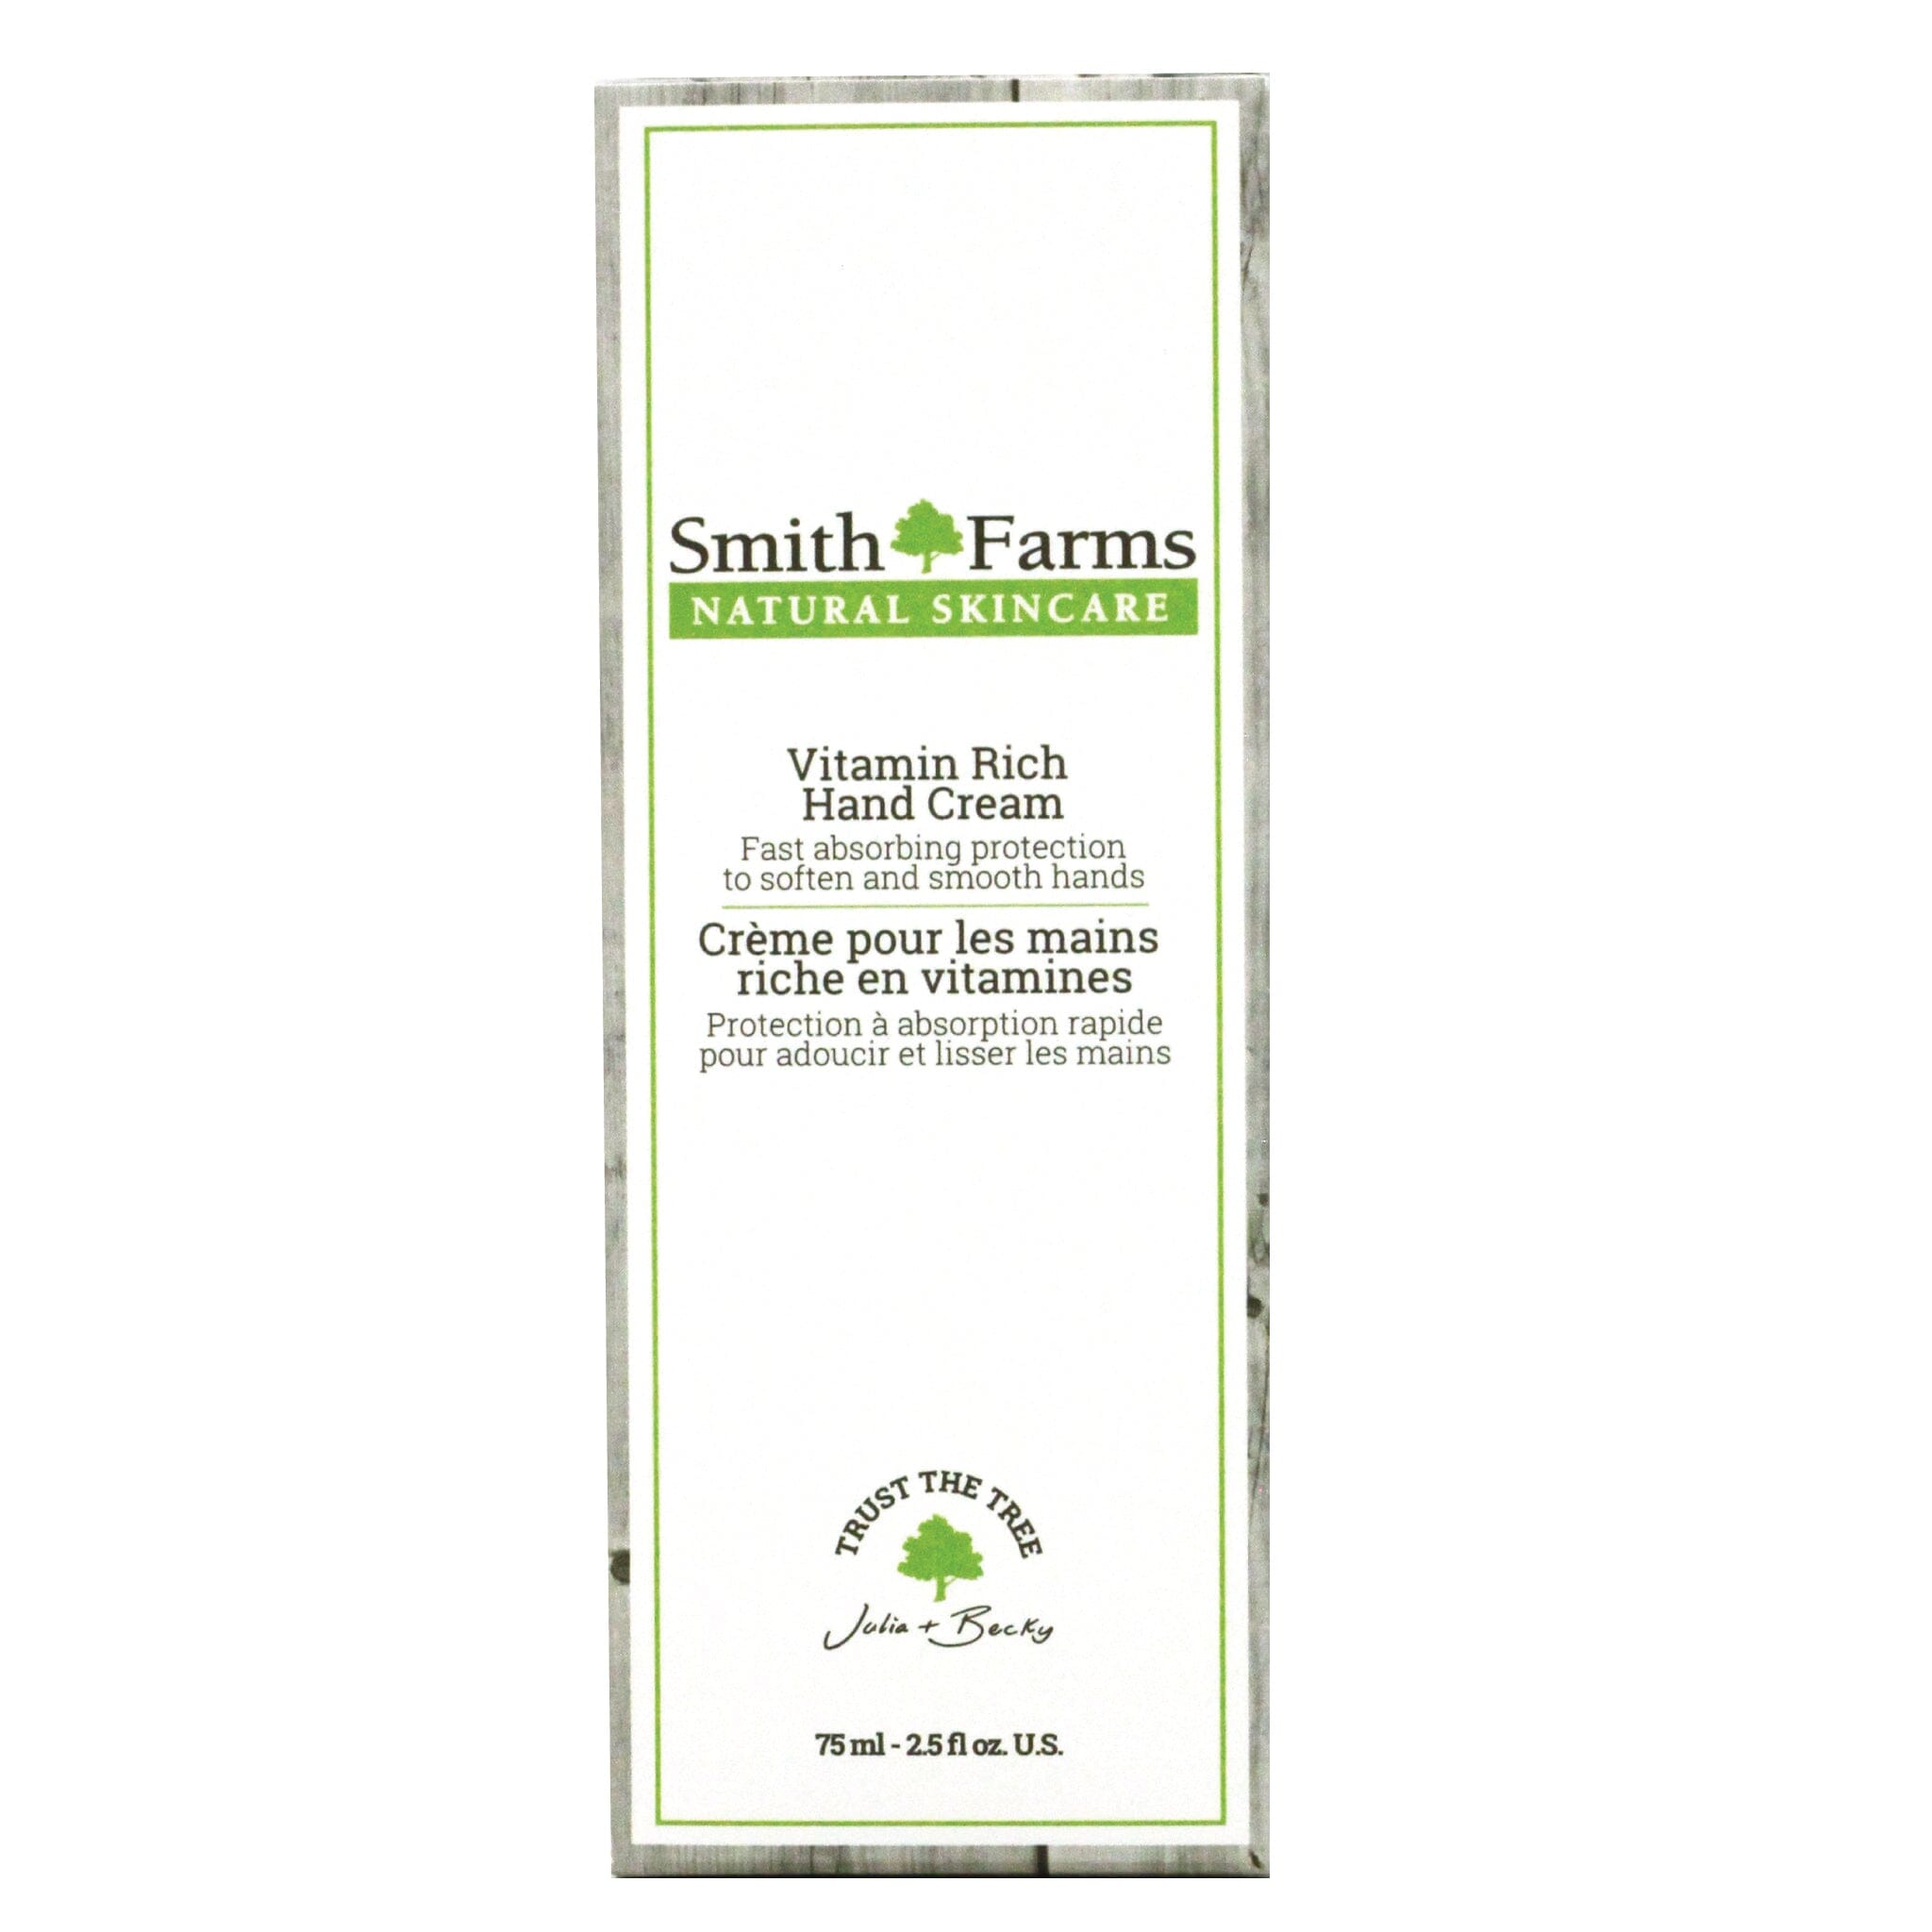 Vitamin Rich Hand Cream Body Care,Our Products Smith Farms 